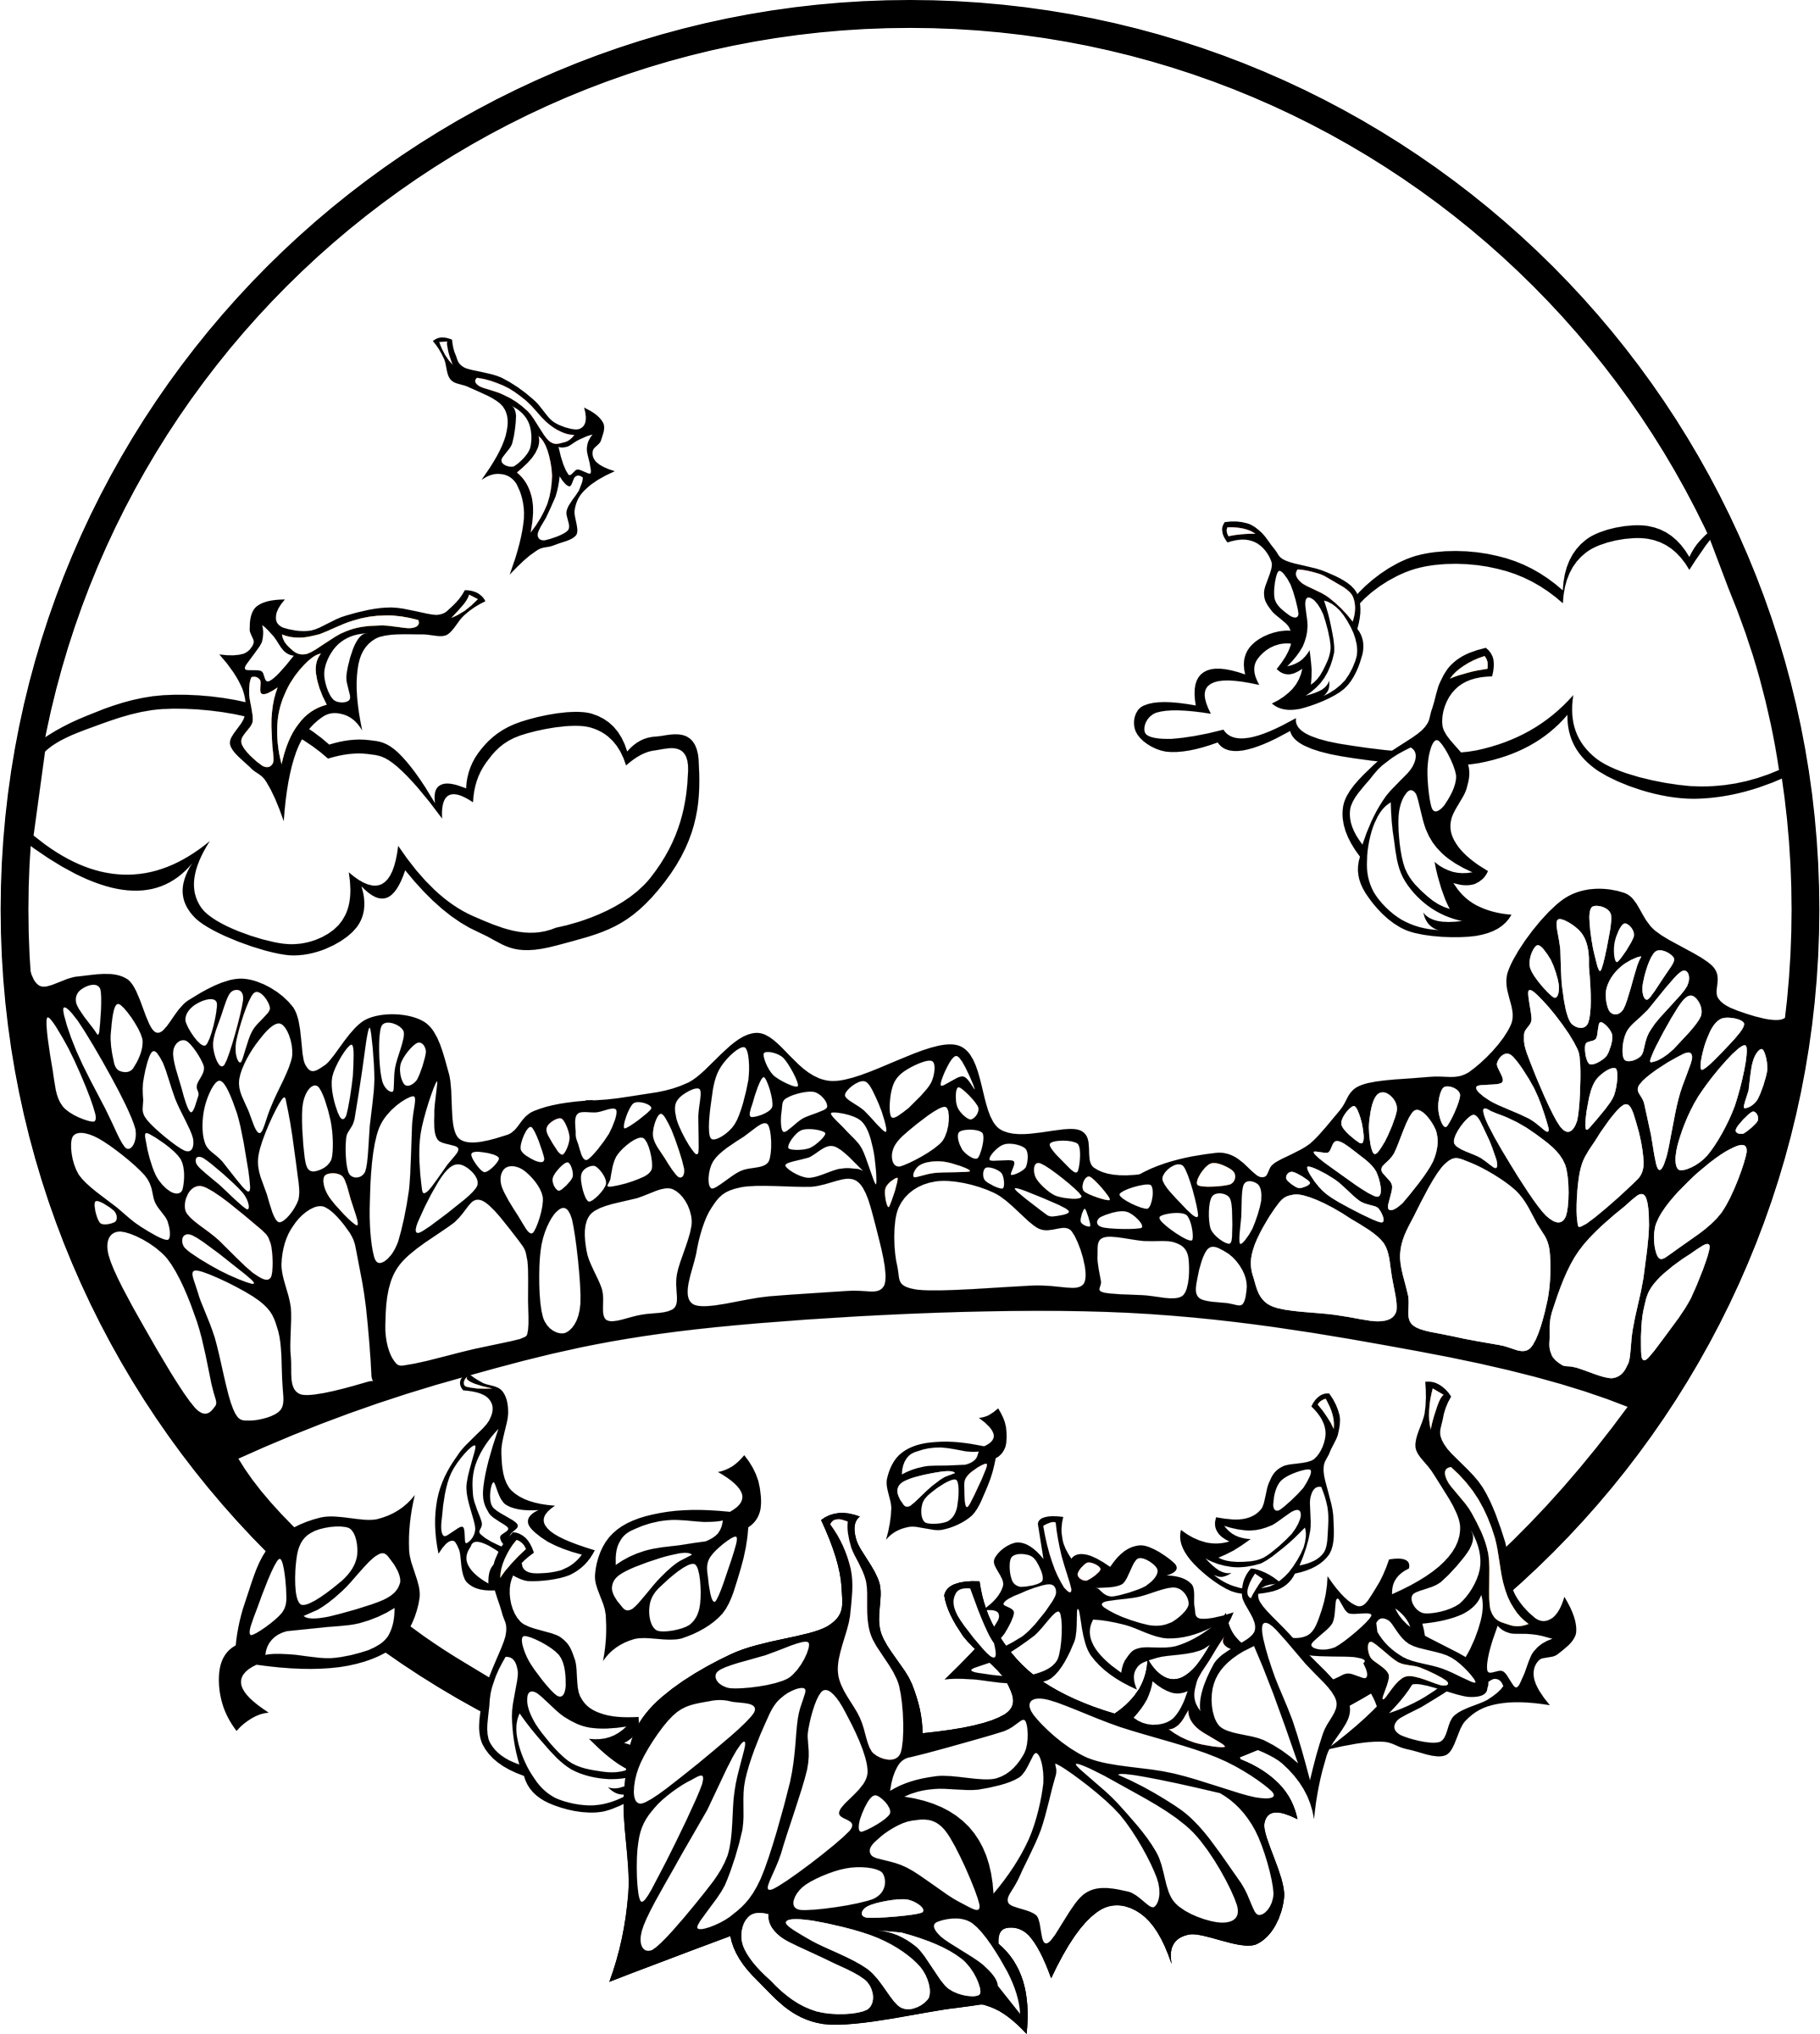 6 Pics of Fall Scene Coloring Pages - Winter Scene Coloring Pages ...